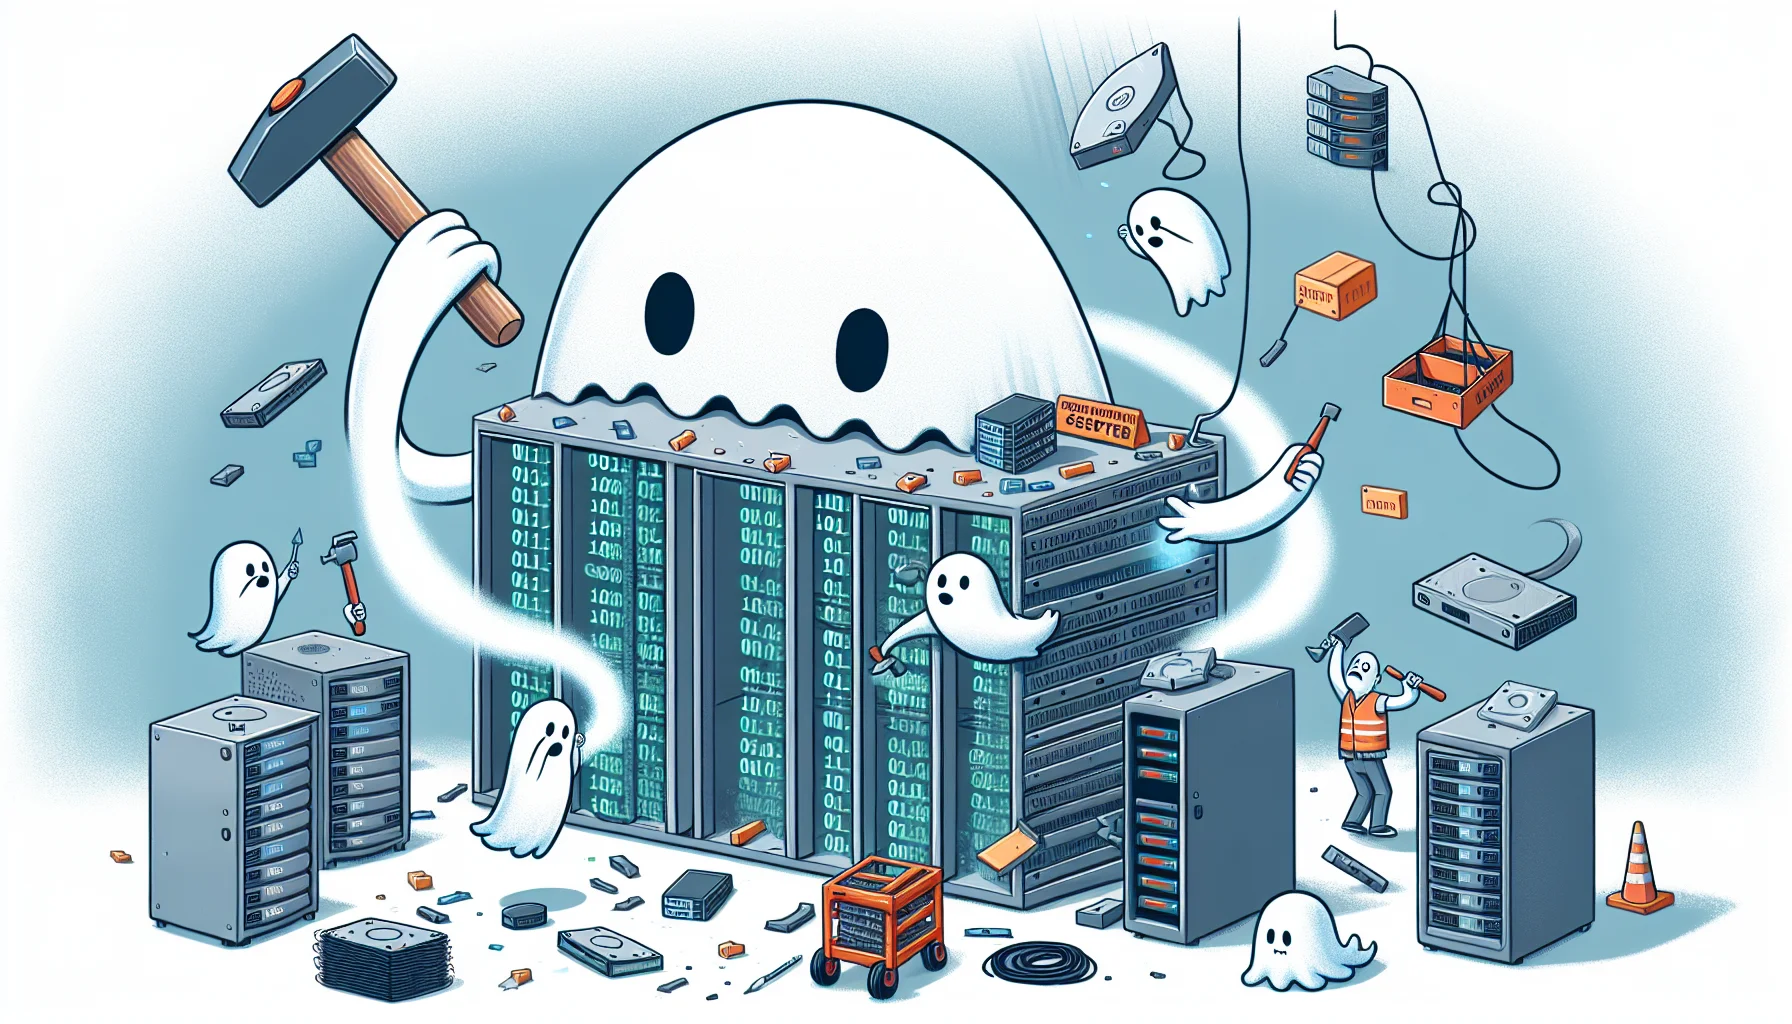 Illustrate a humorous scenario involving a whimsical phantom character intent on building websites. It is using a spectral hammer and chisel on flat blocks of binary code, artistically interpreted as solid surfaces. Web hosting elements like server racks and fiber cables are scattered around, playfully serving as construction material. Some ghosts are running around with hard drives while others are joined together in a spectral assembly line, making the scenario seem lively and chaotic. The primary colors in this image should be light greys, blues, and glowing whites to emphasize the ghostly and digital elements.